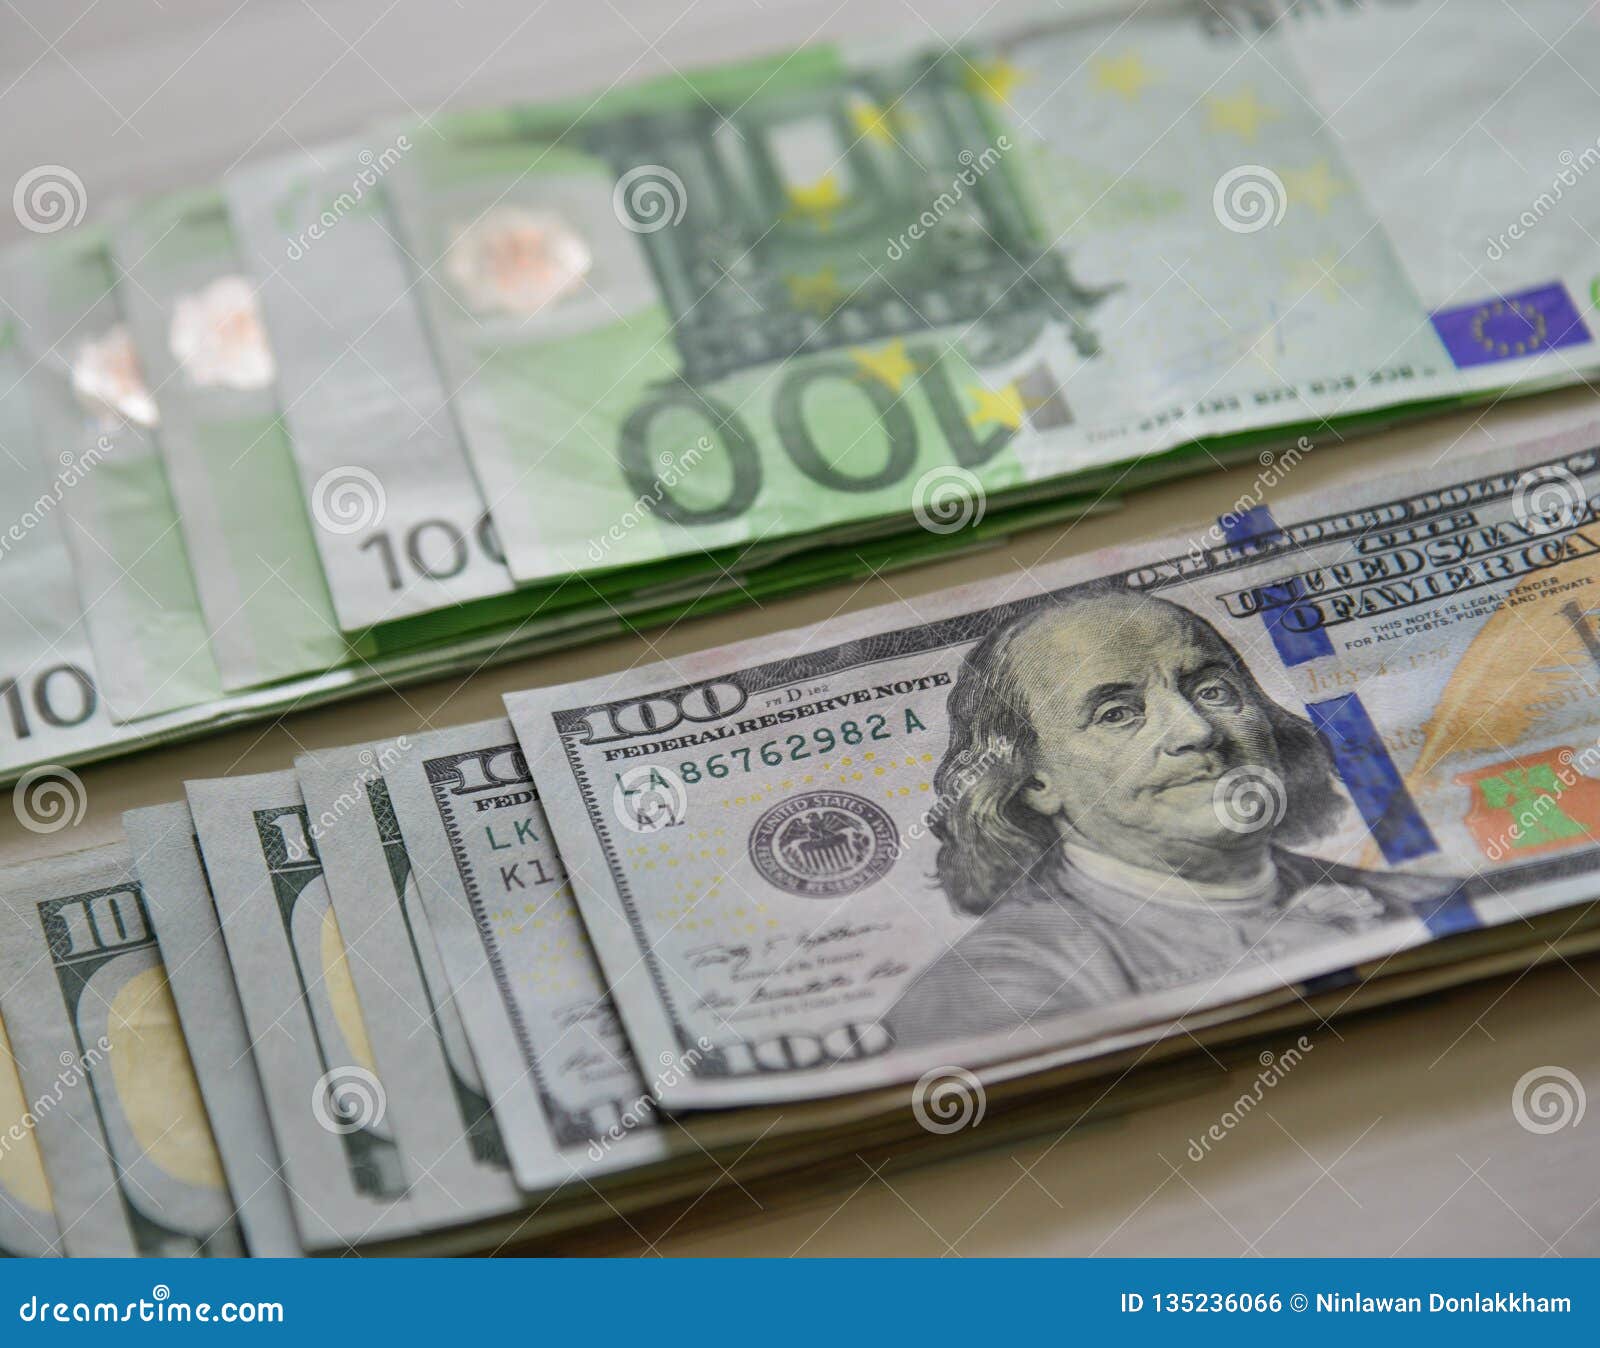 Euro Eur And Us Dollars Usd Currency Stock Photo Image Of Money - 